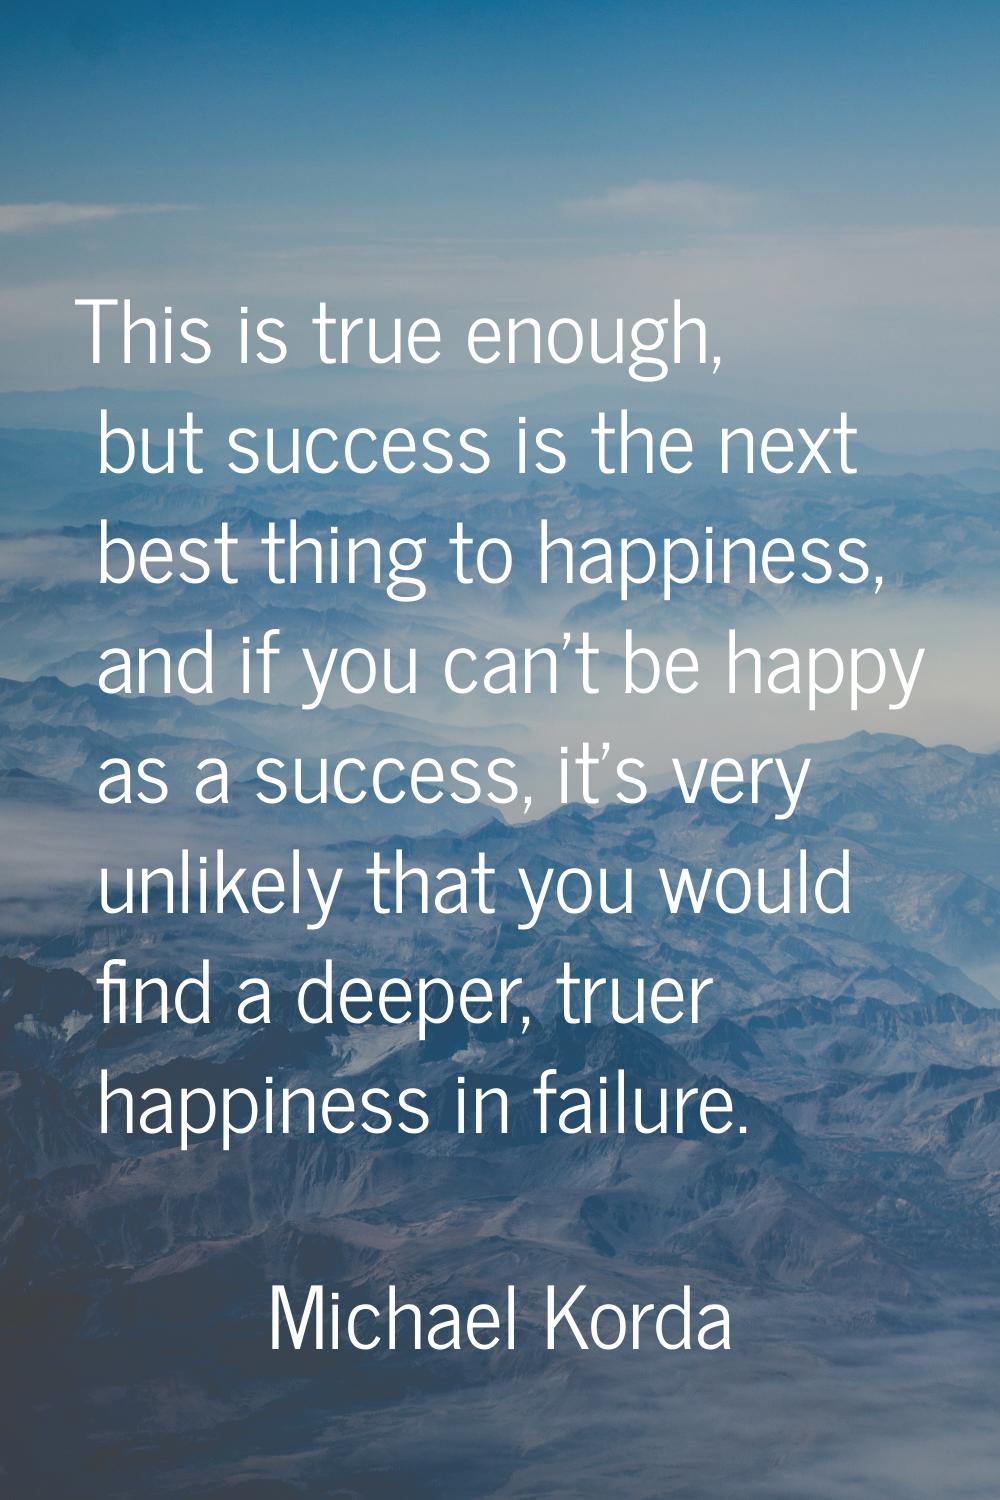 This is true enough, but success is the next best thing to happiness, and if you can't be happy as 